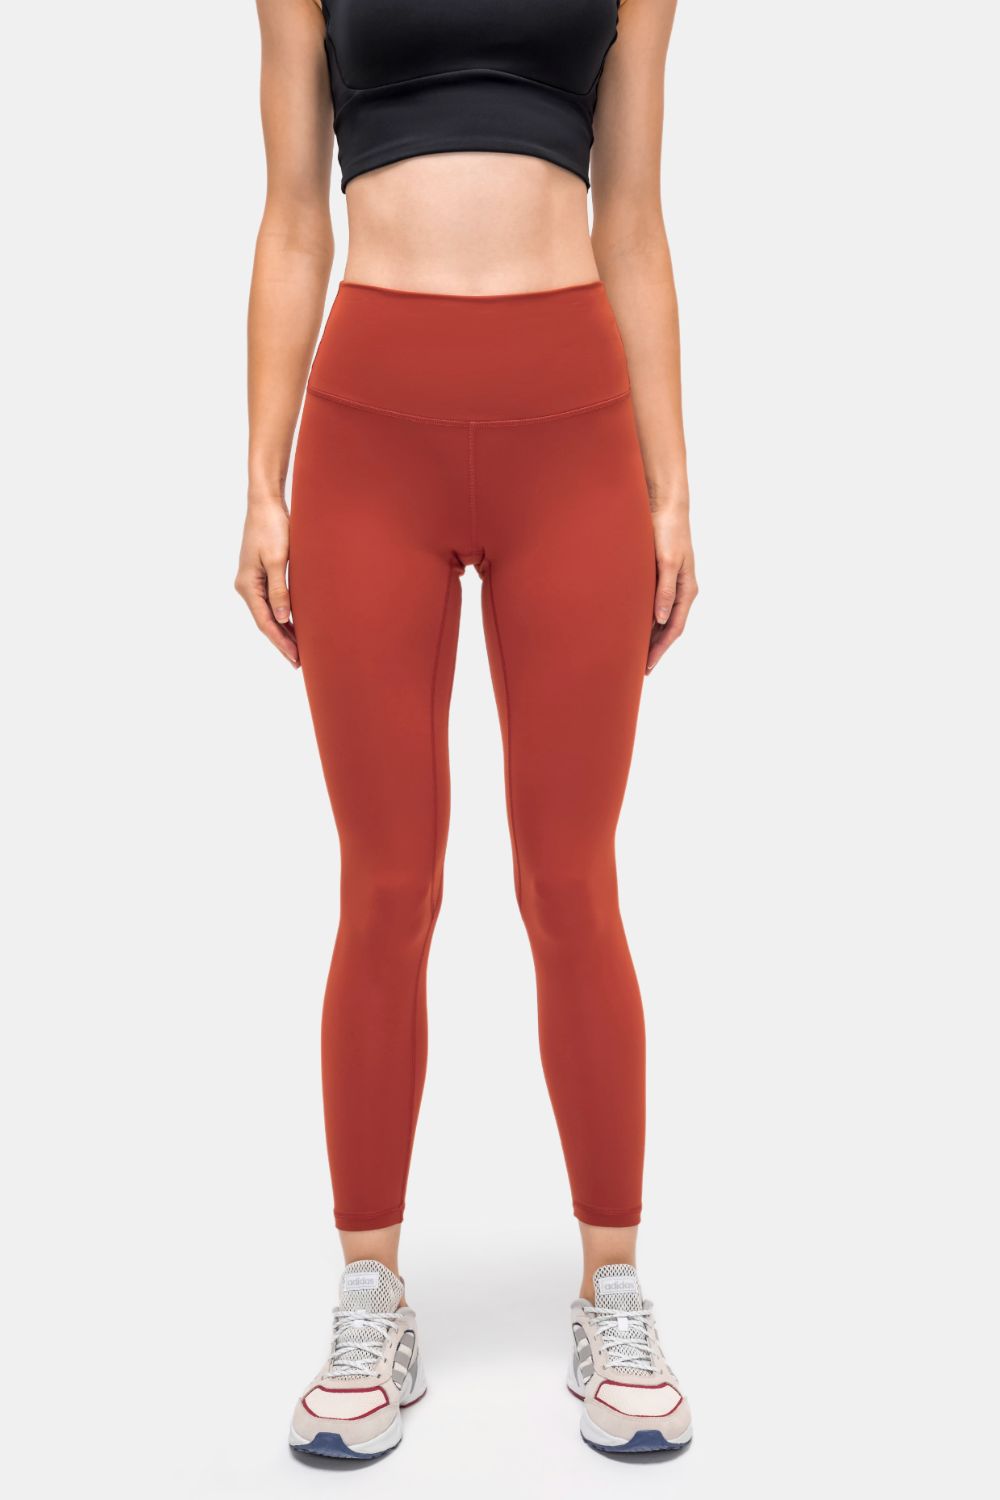 Invisible Pocket Sports Women's Activewear Leggings